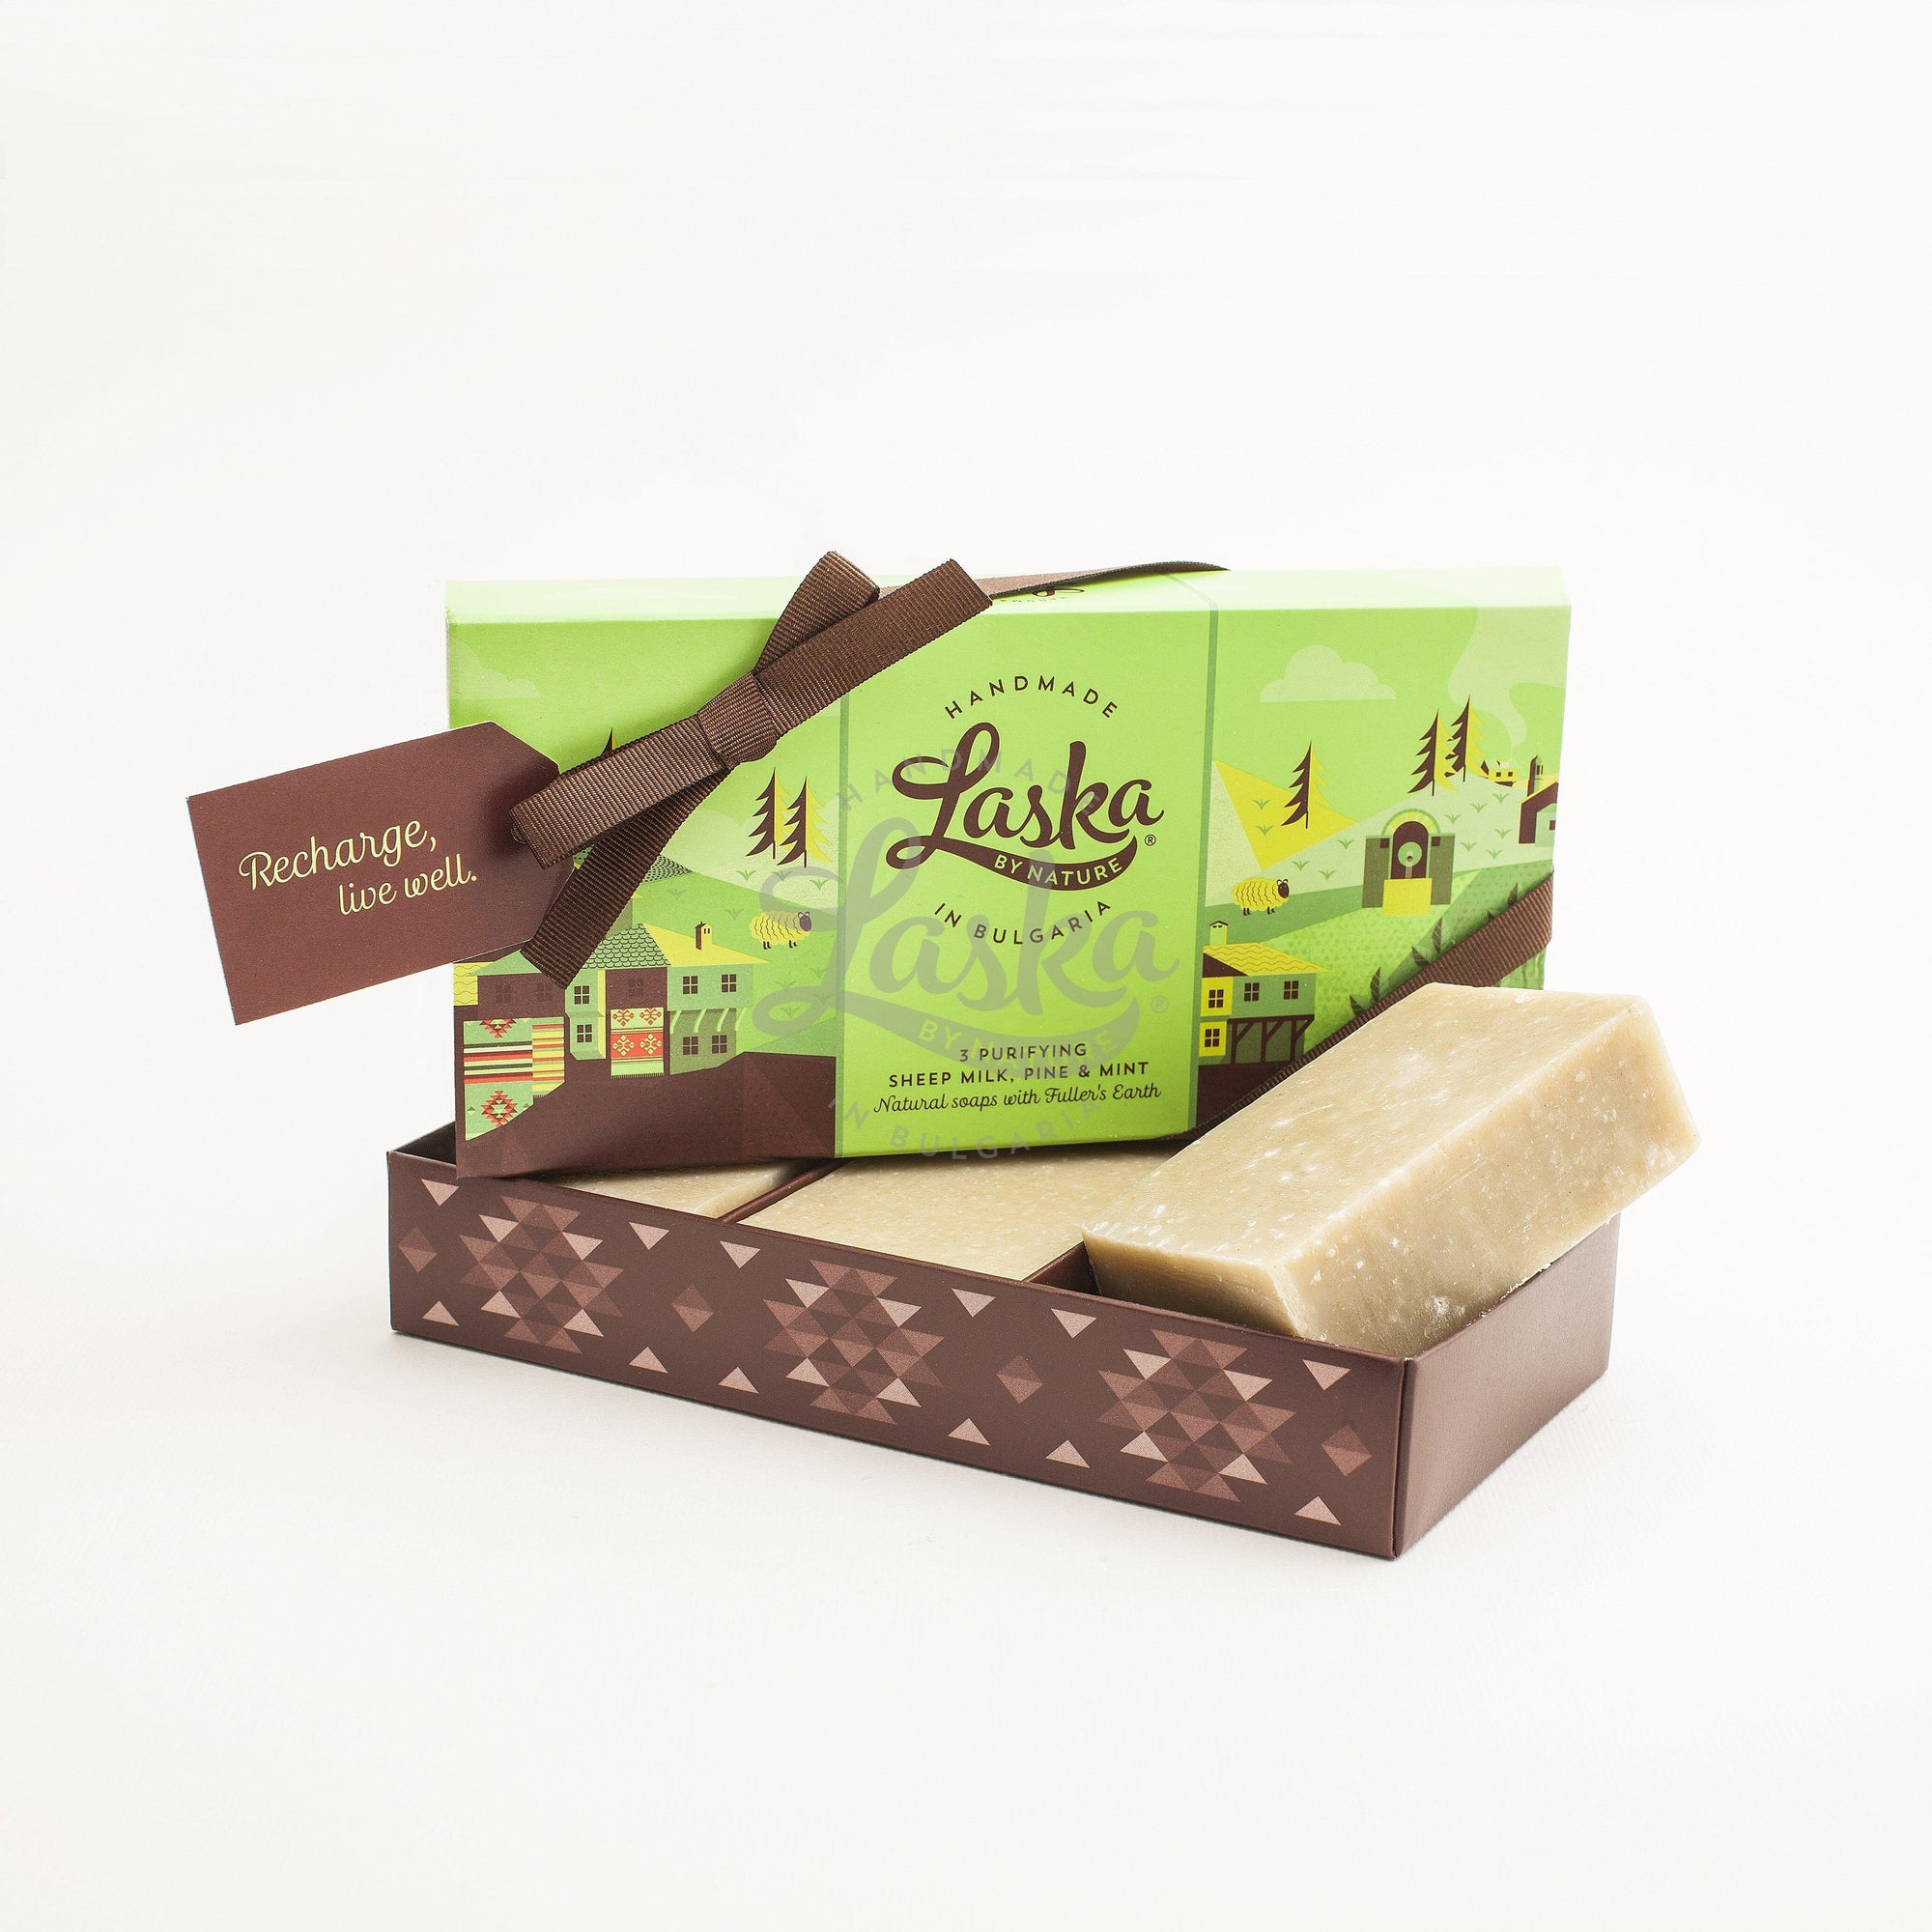 The gift trio: Bulgarian sheep-milk, pine & mint soap with Fuller's Earth-Gift natural soap-Laska by nature